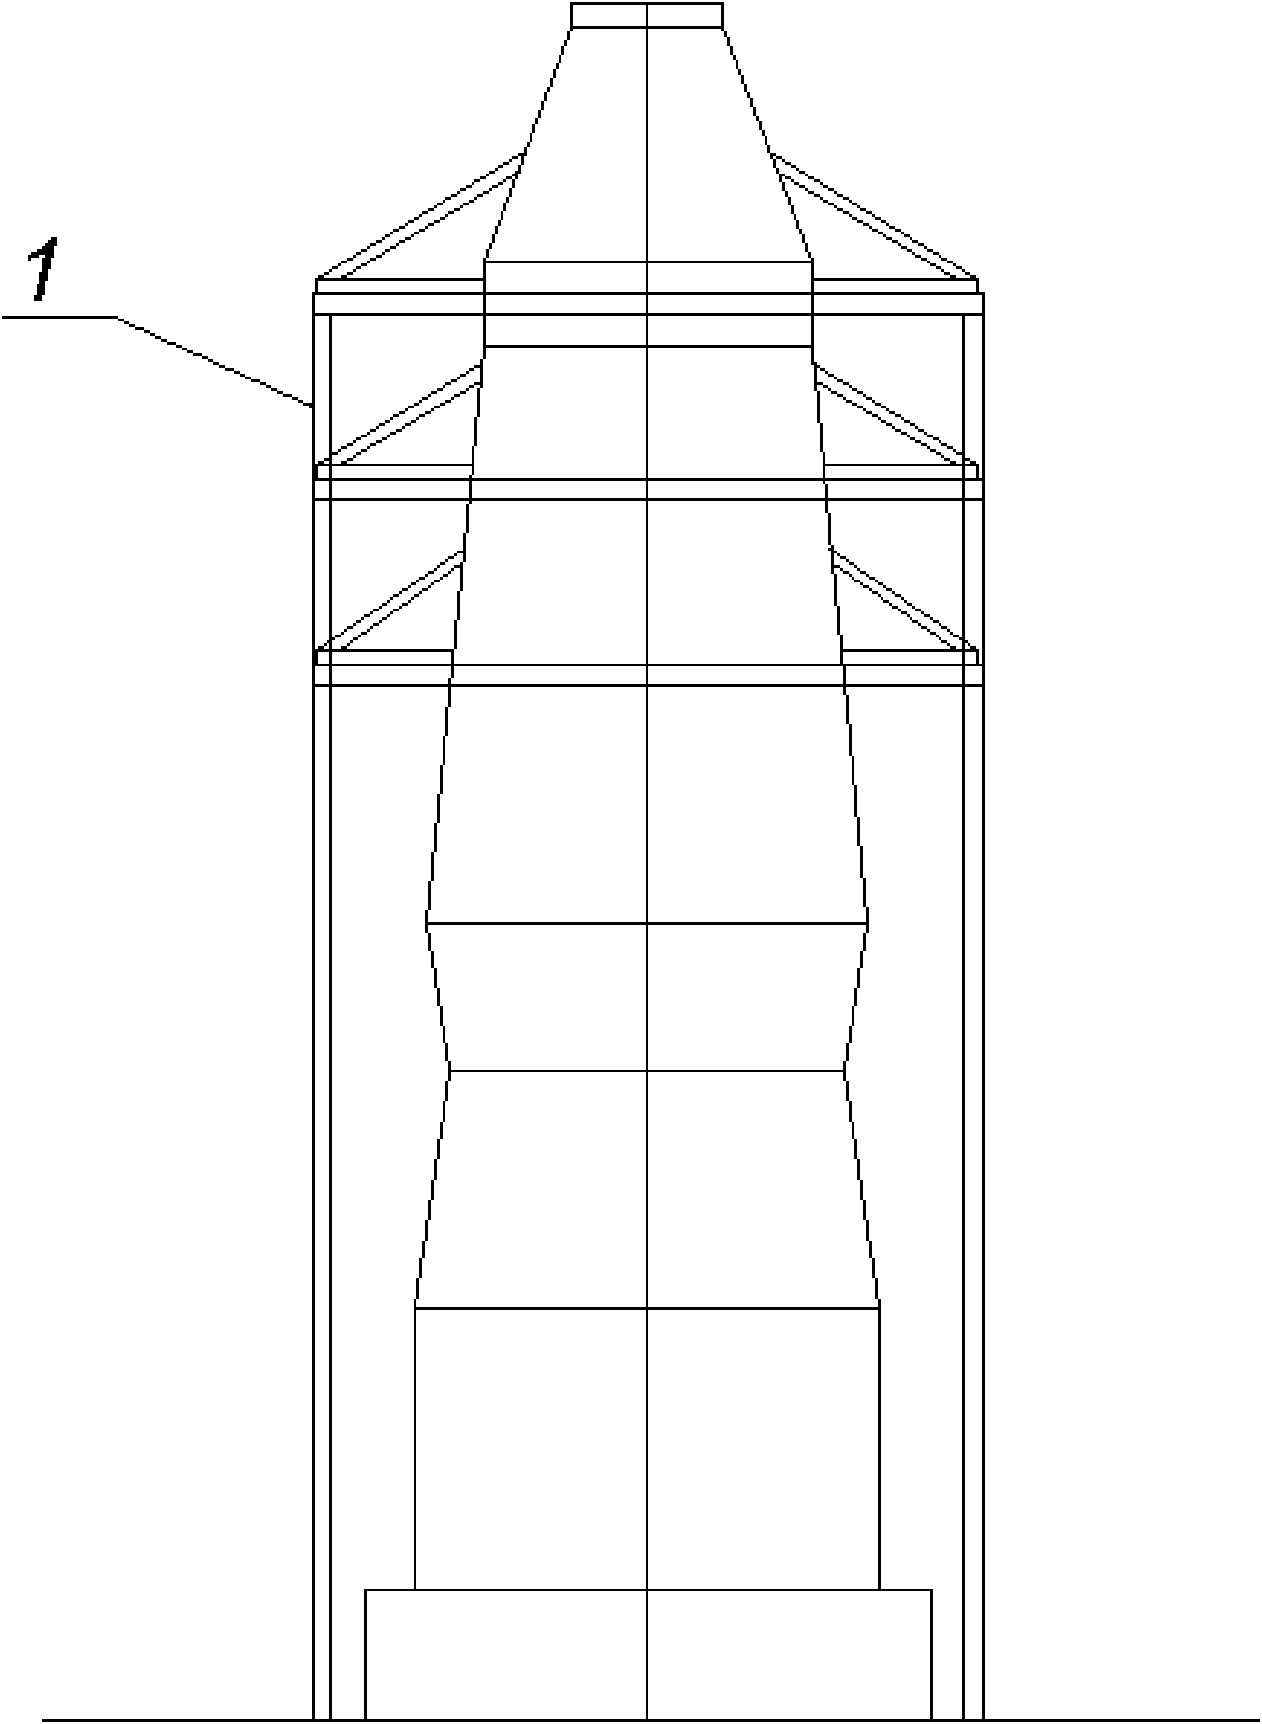 Replacing method of blast furnace shell and water wall